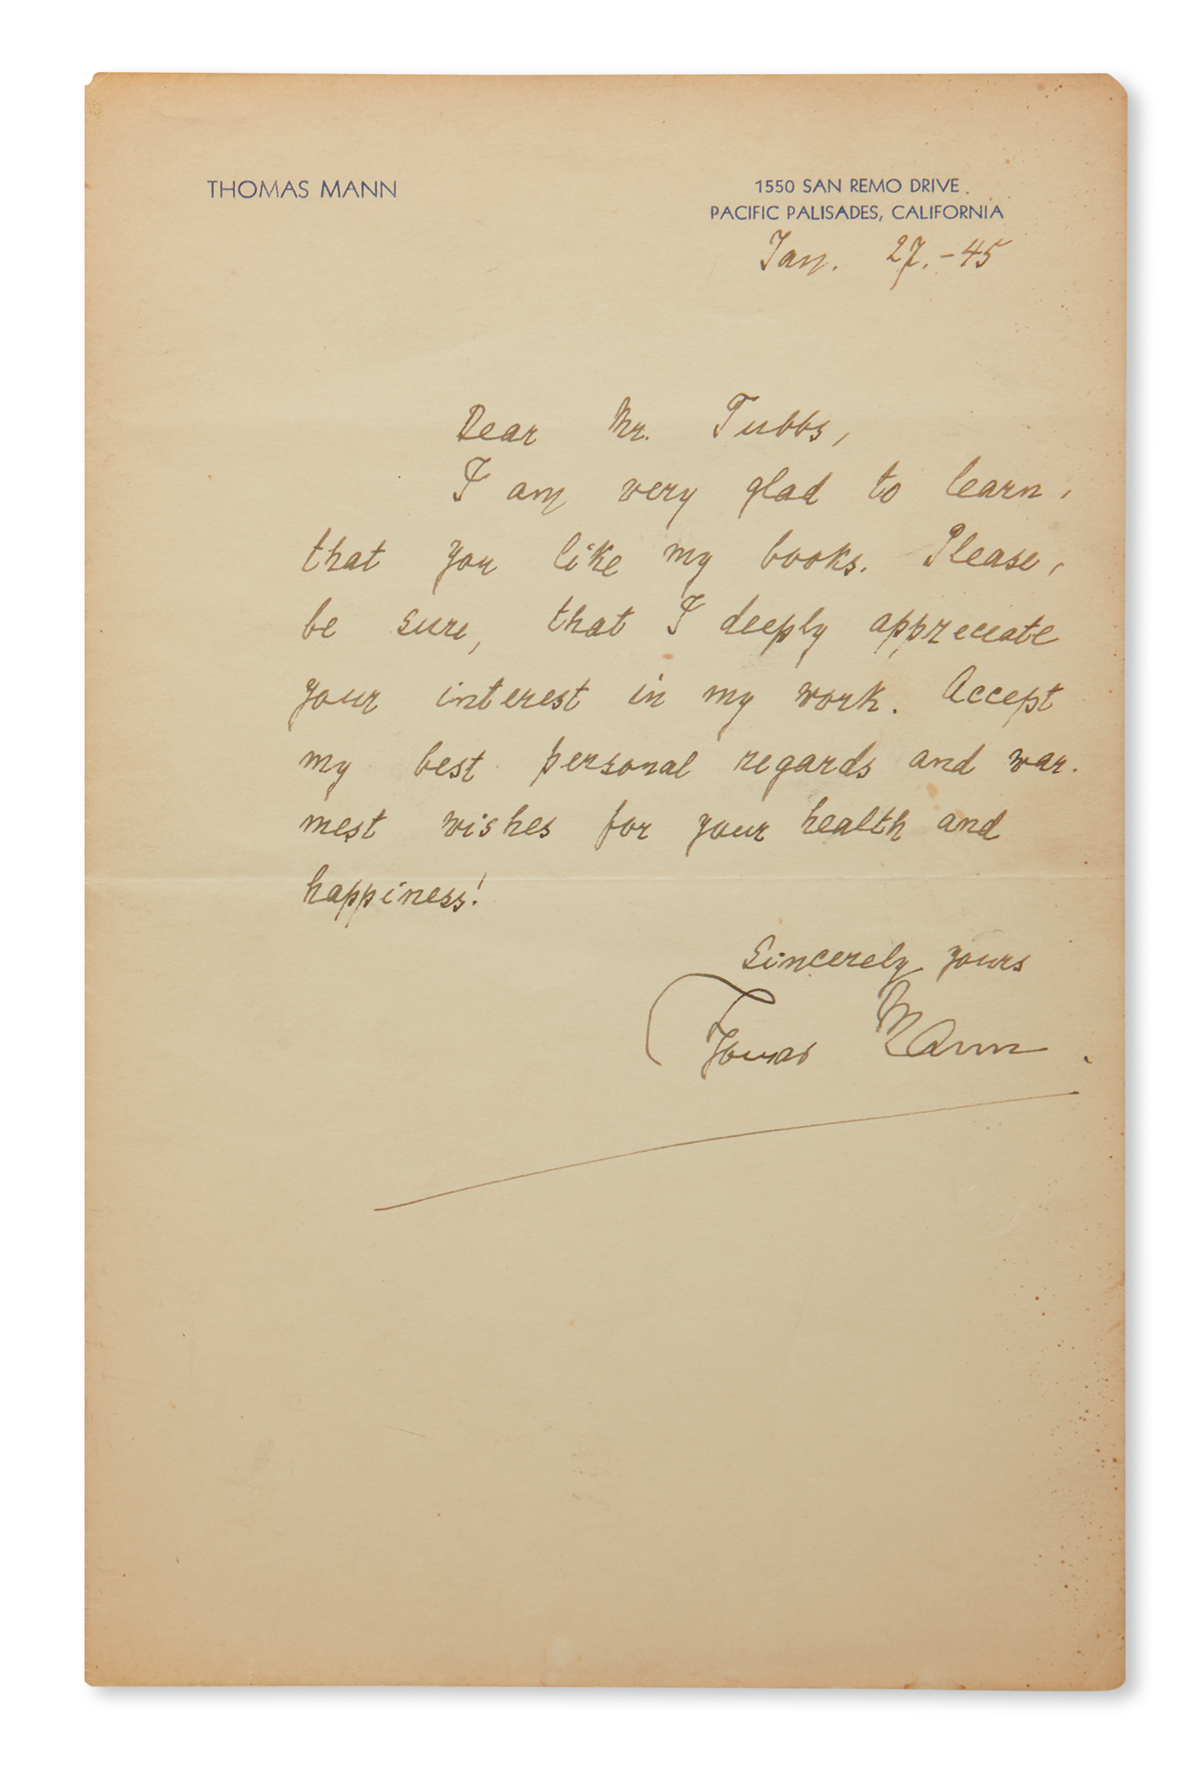 THOMAS MANN. Autograph Letter Signed, to Dear Mr. Tubbs, in English, expressing appreciation for the remarks a...